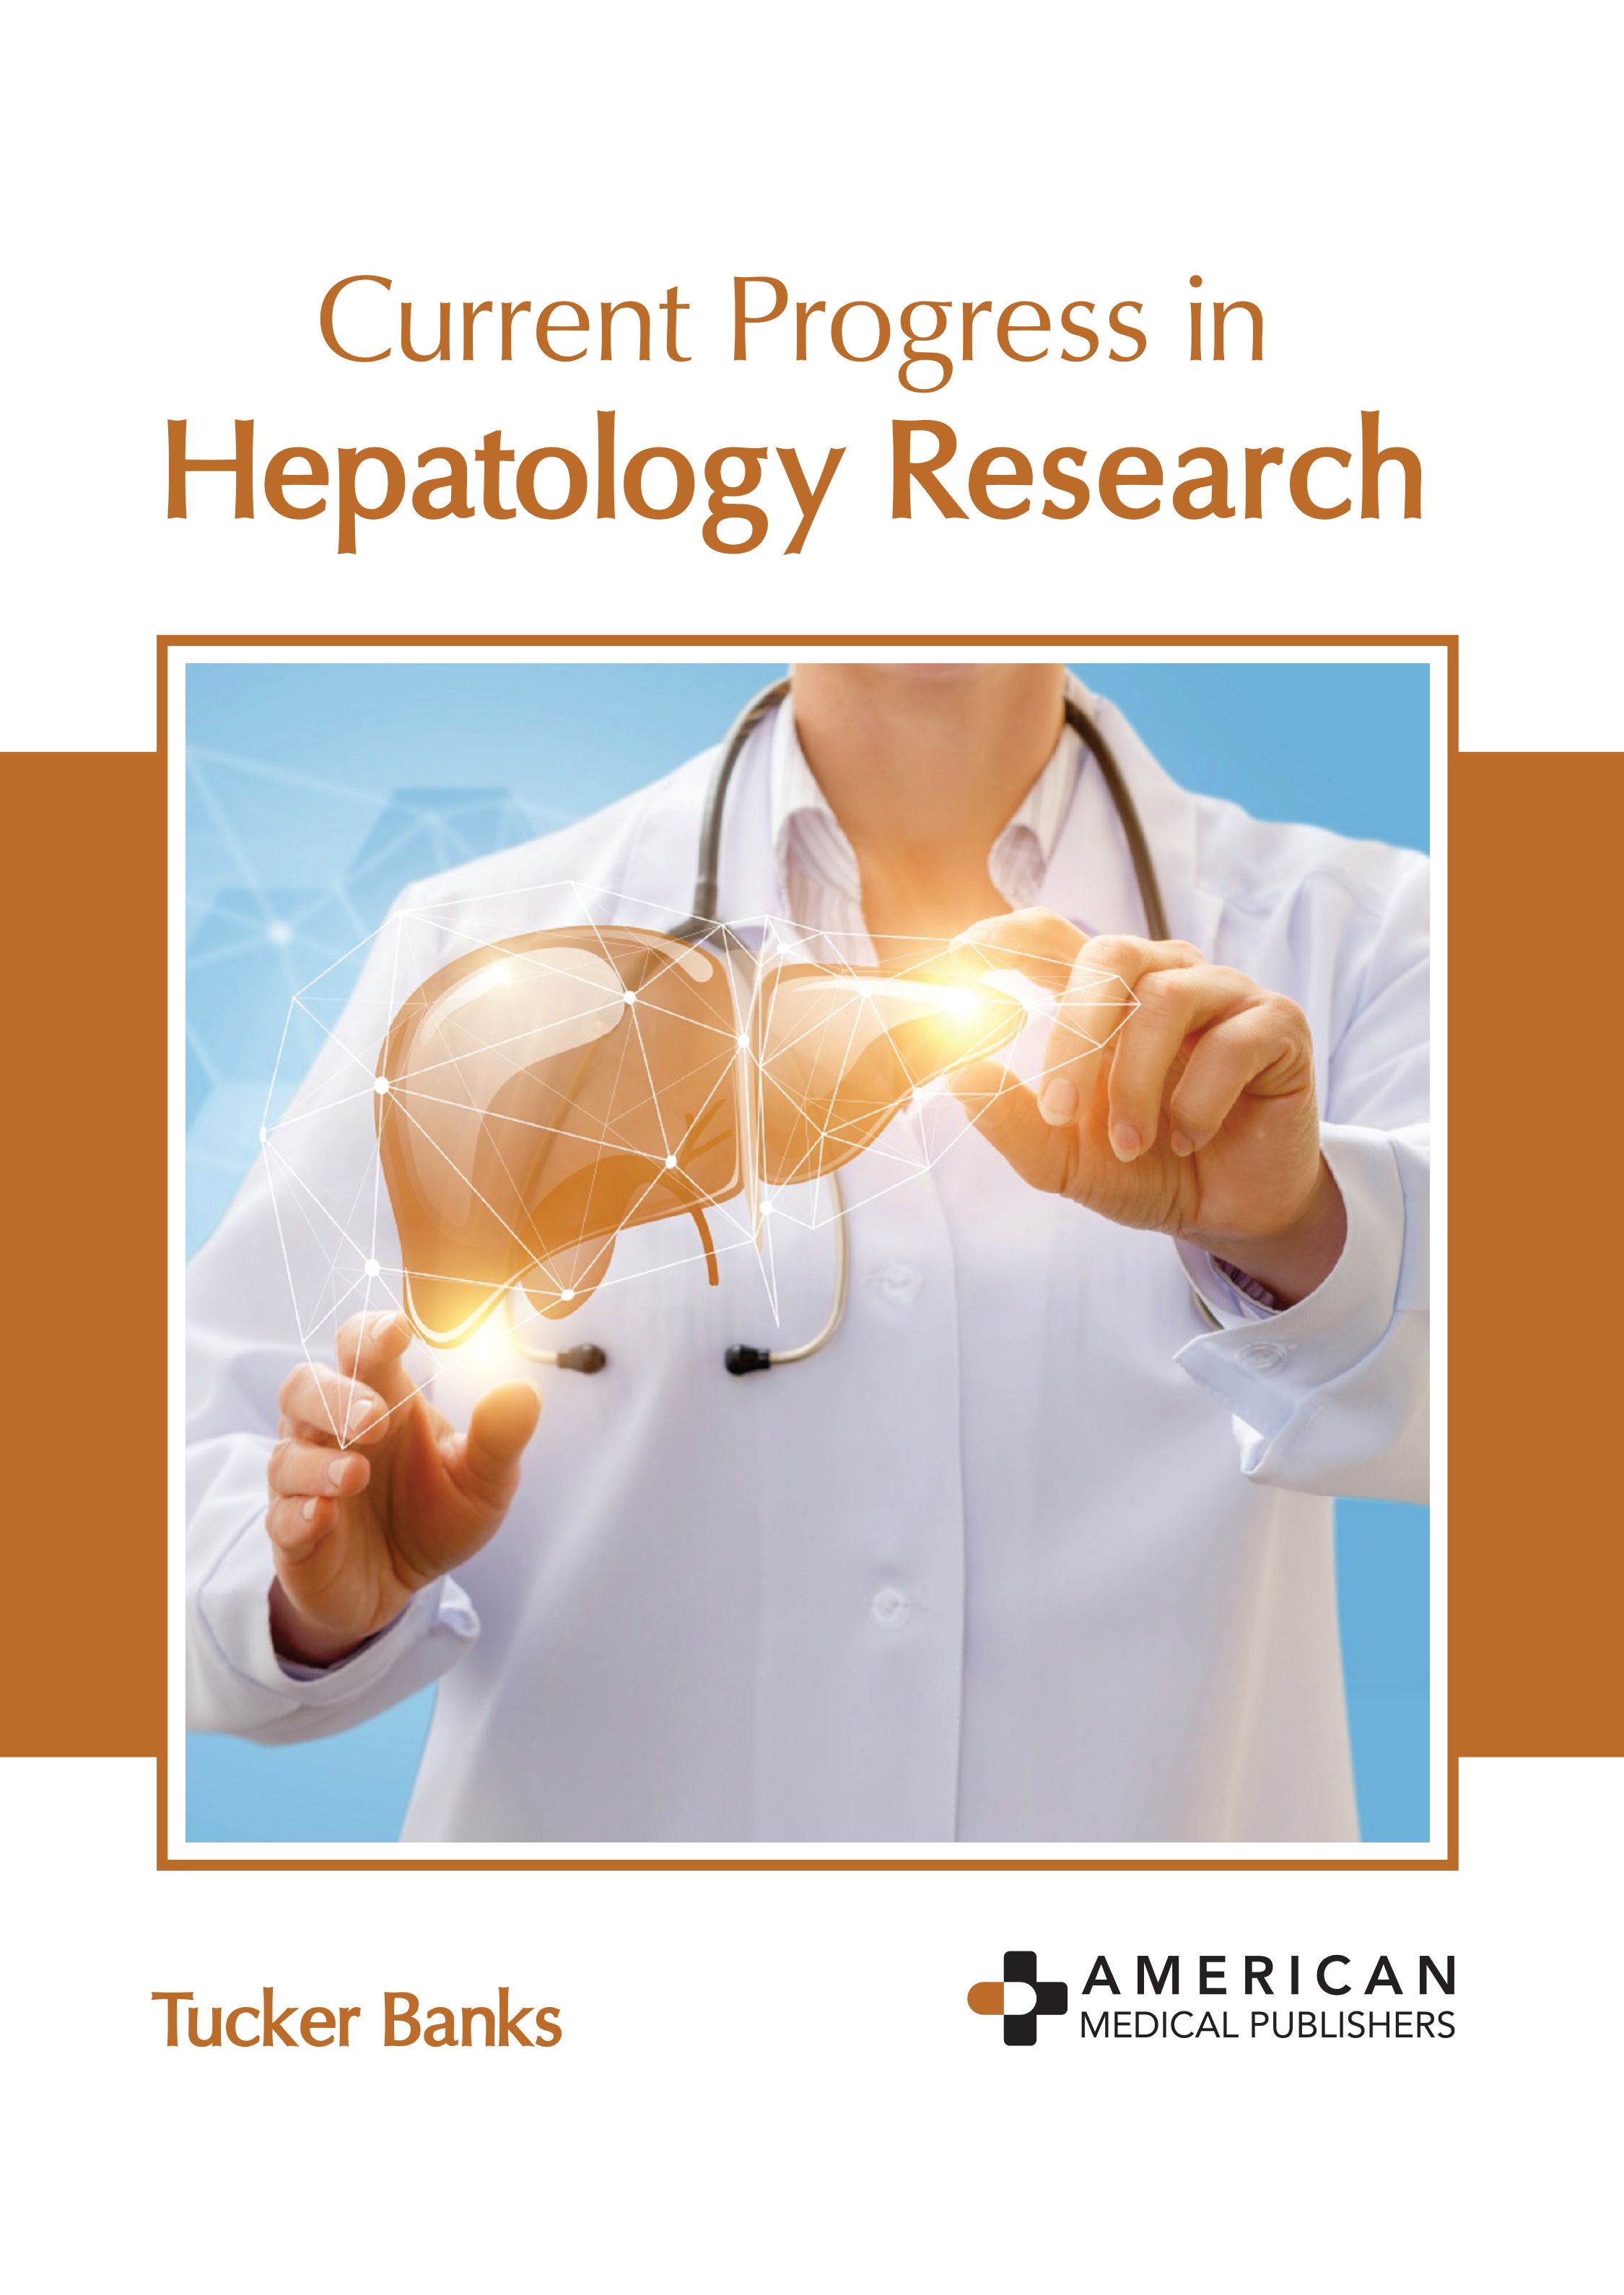 CURRENT PROGRESS IN HEPATOLOGY RESEARCH